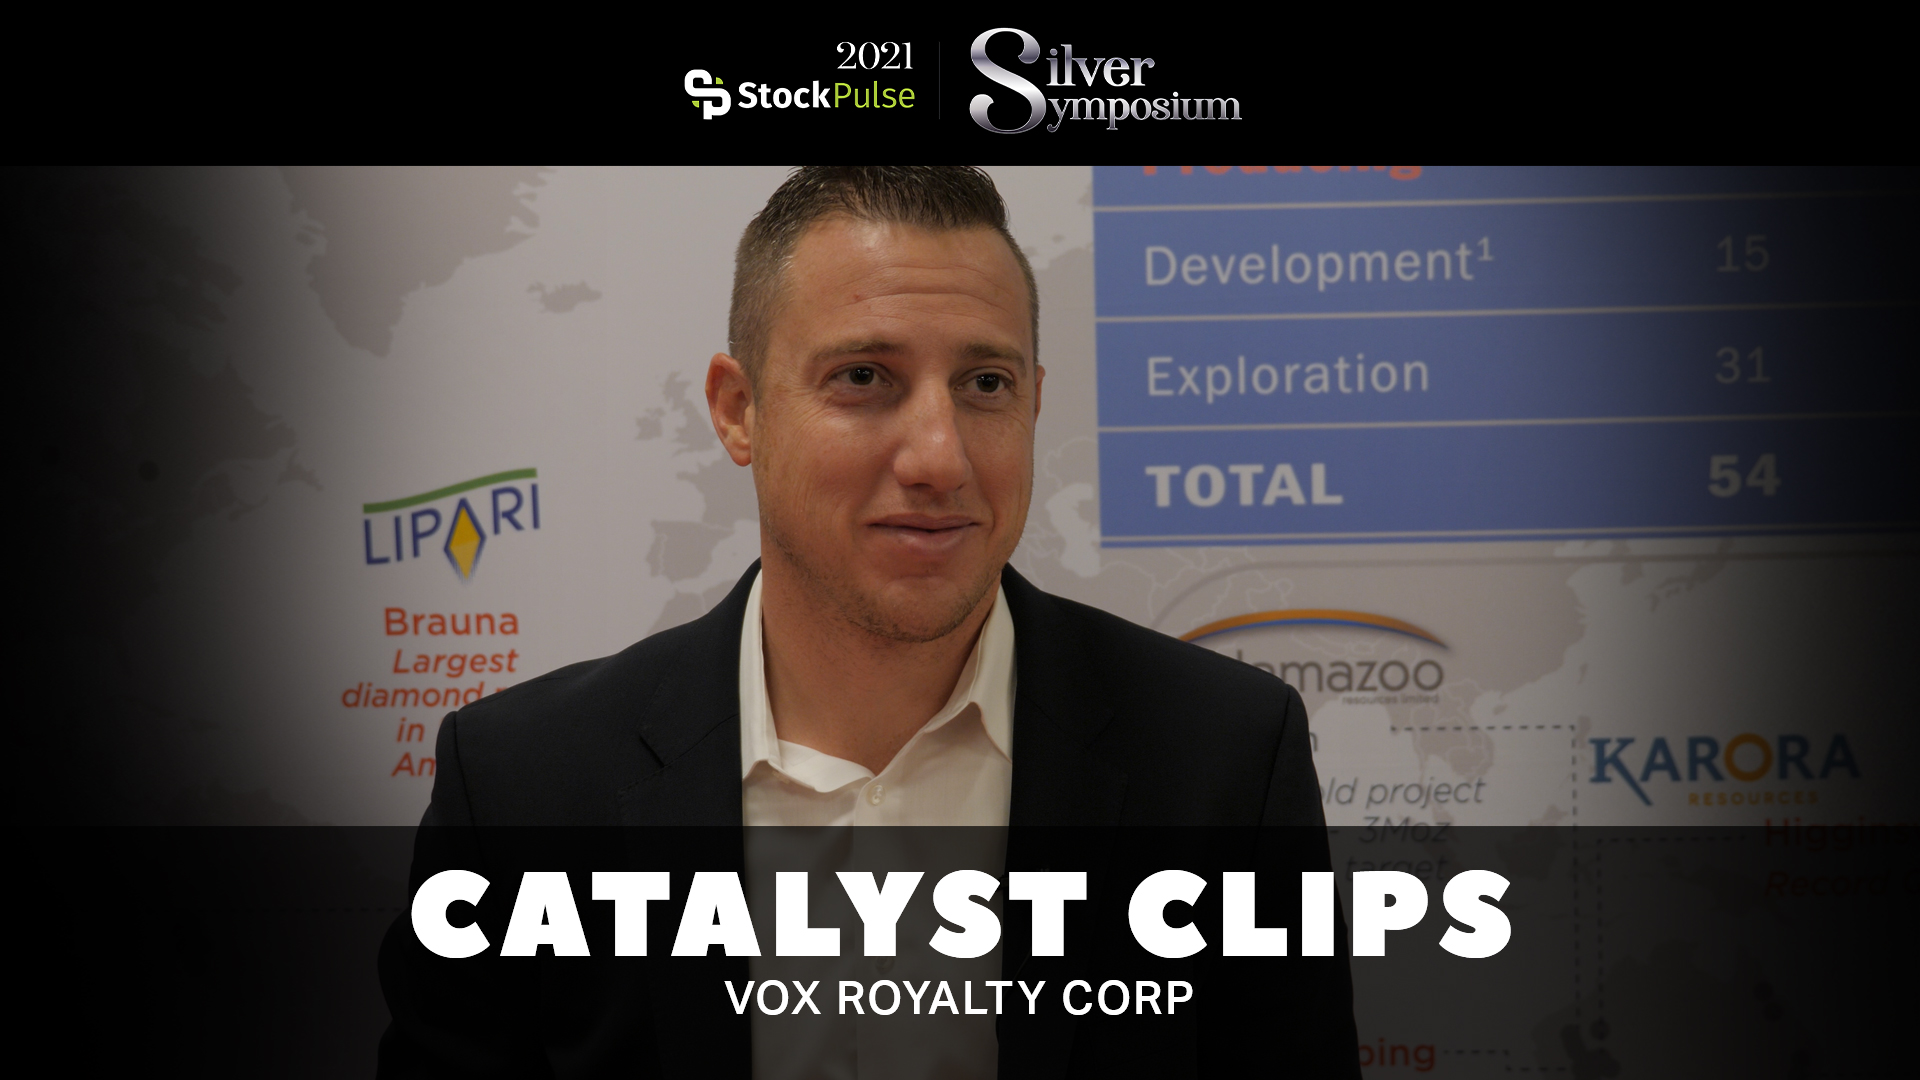 2021 StockPulse Silver Symposium Catalyst Clips | Kyle Floyd of Vox Royalty Corp